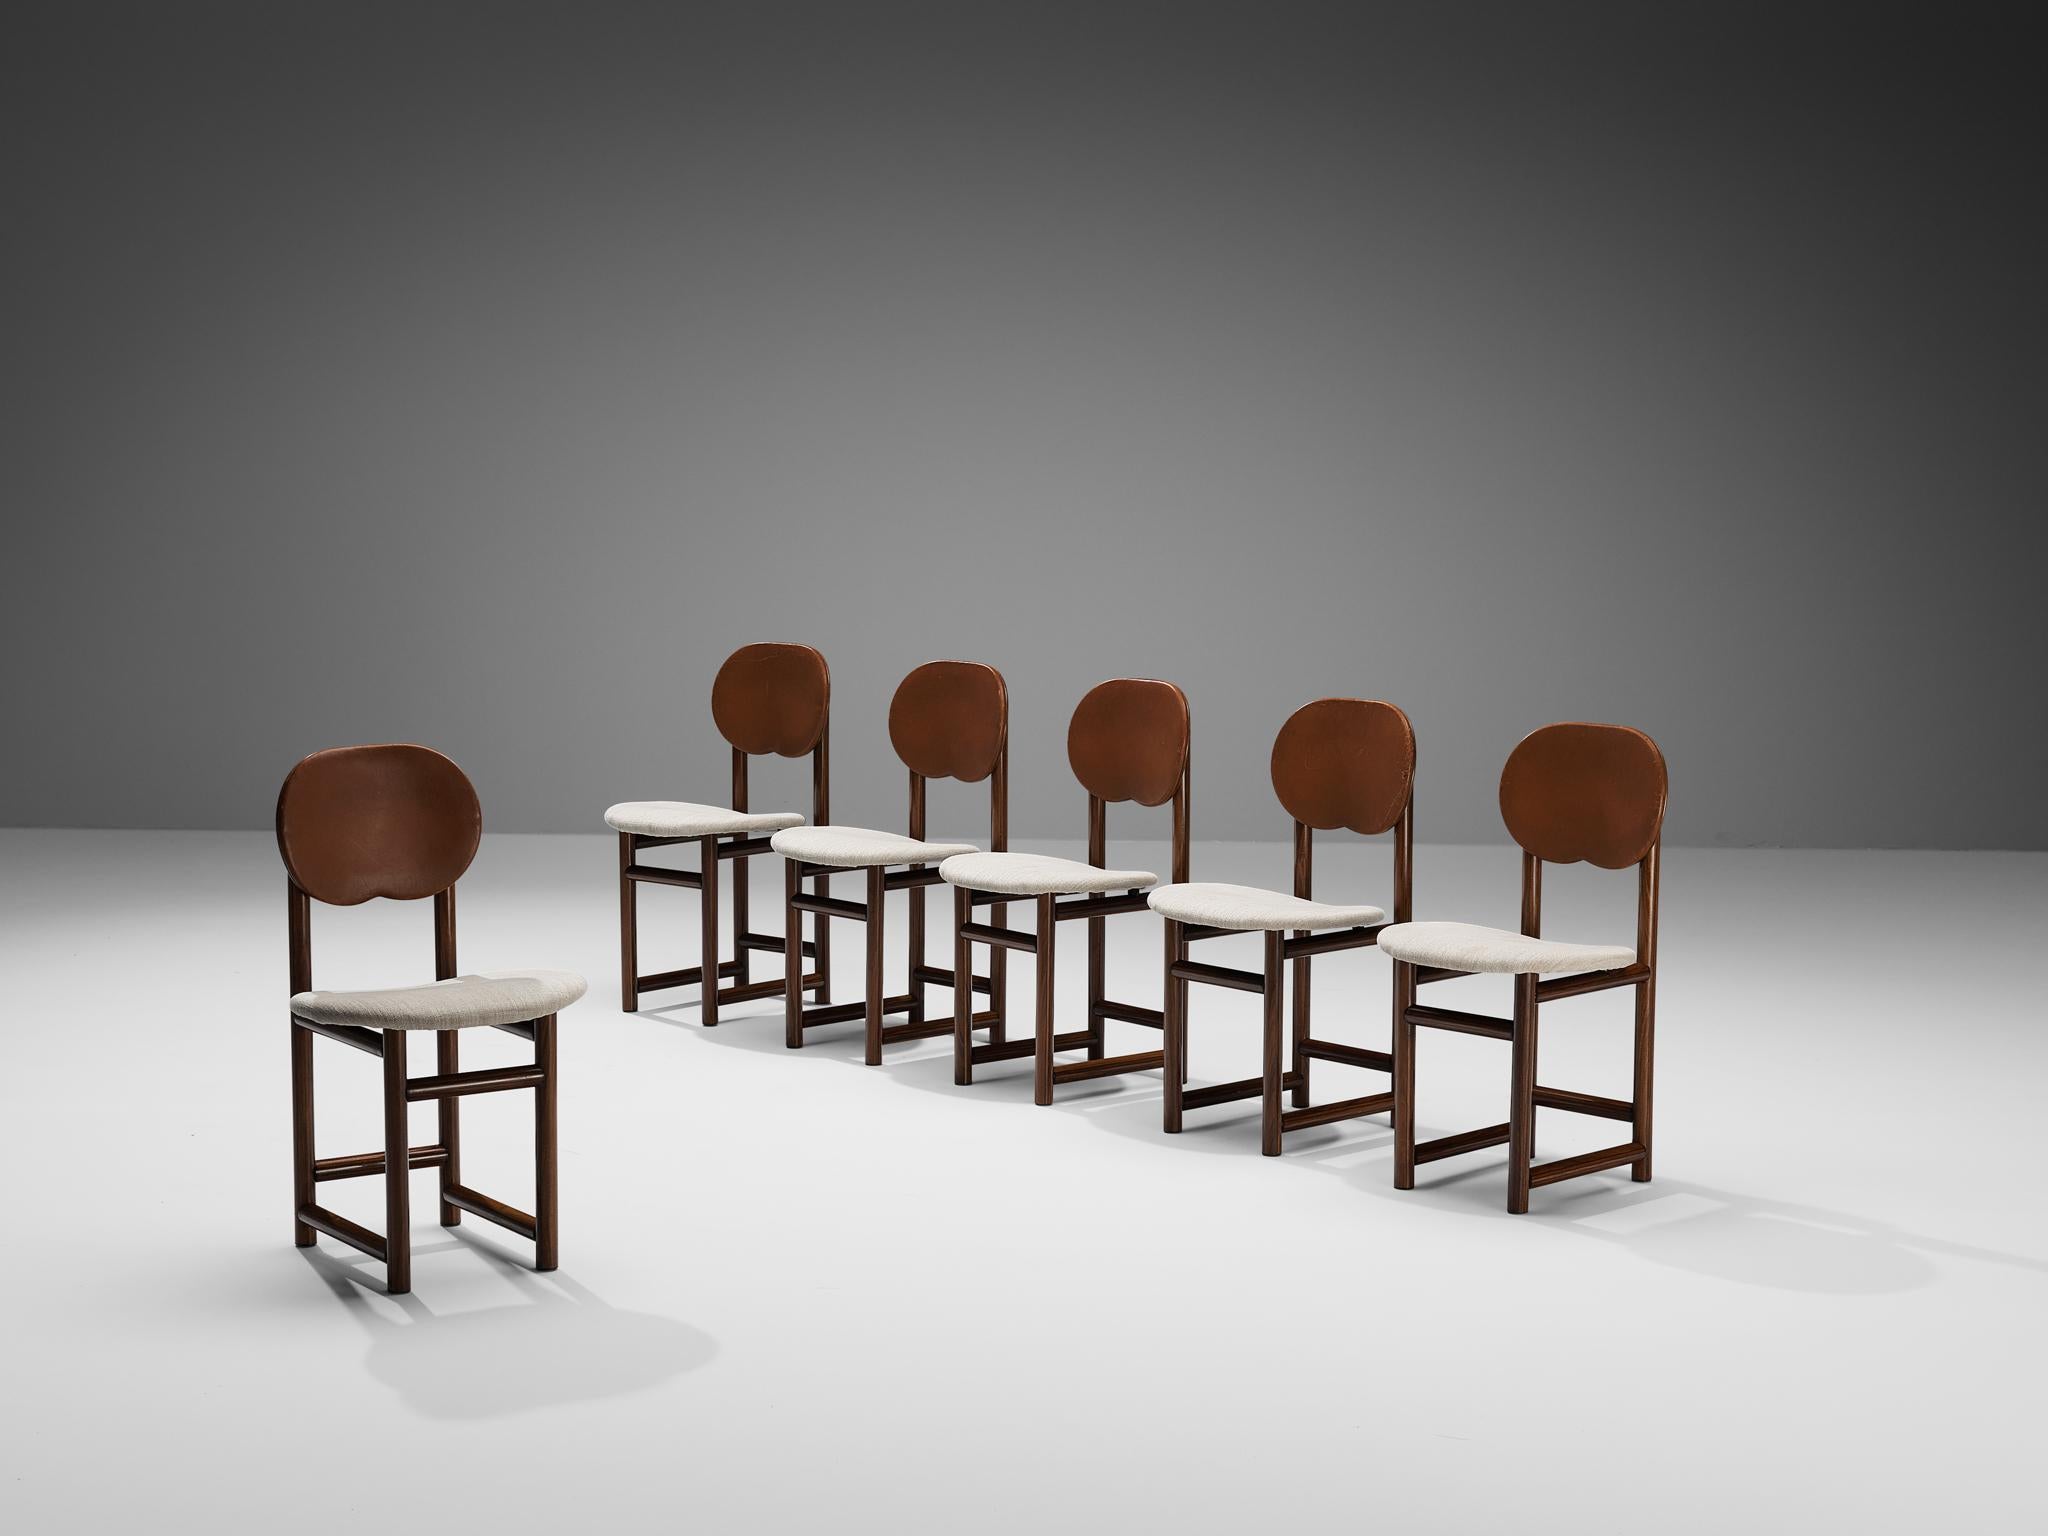 Afra & Tobia Scarpa for Maxalto, 'New Harmony' set of six dining chairs, walnut, fabric, leather, Italy, circa 1983

The 'New Harmony' collection designed by Afra & Tobia Scarpa is distinguished by its sleek proportions and postmodern aesthetic. The